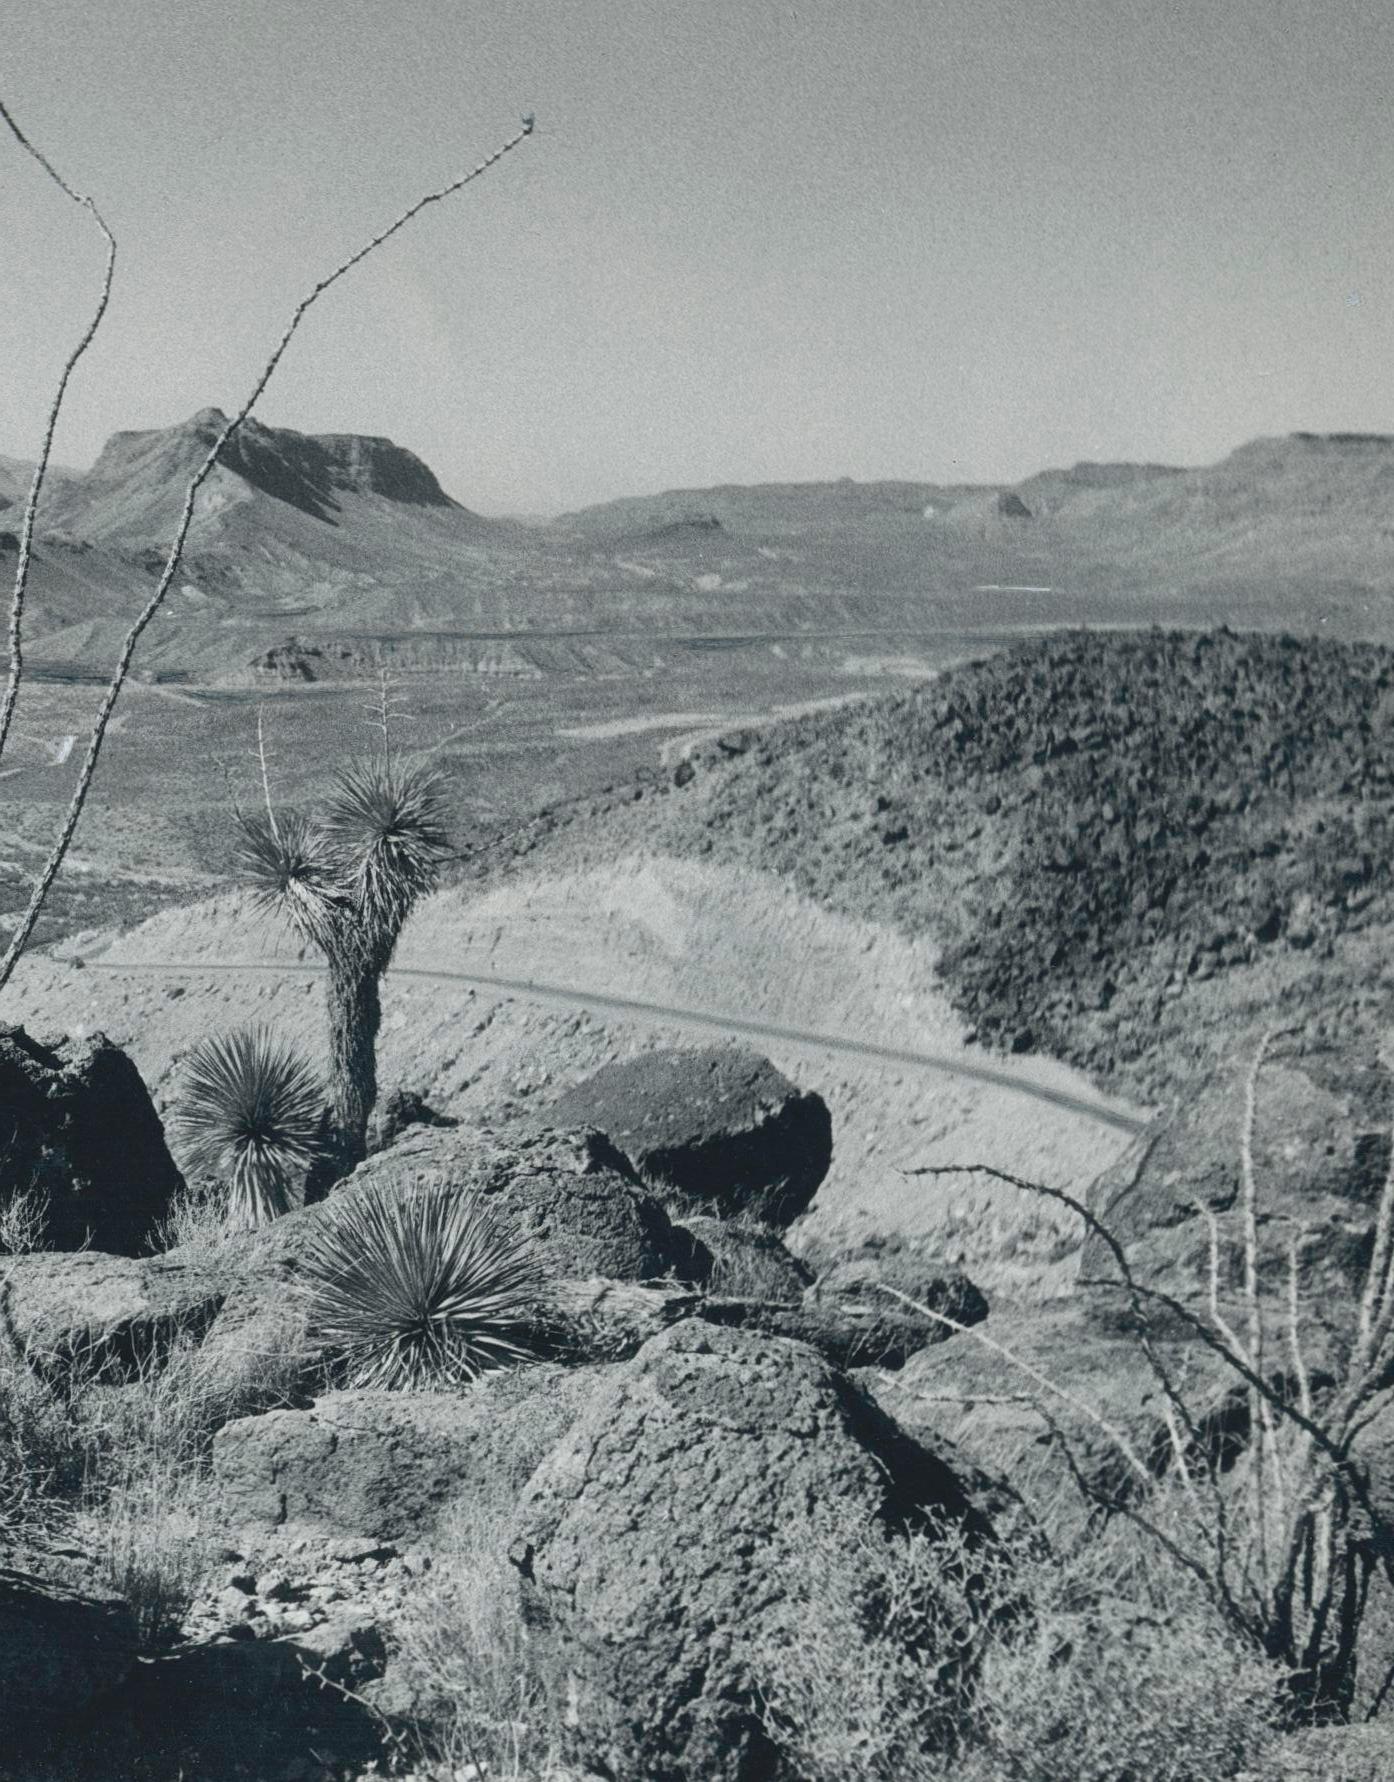 Cacti, Landscape, Rio Grande, Black and White, USA 1960s, 16, 7 x 23, 2 cm - Modern Photograph by Erich Andres